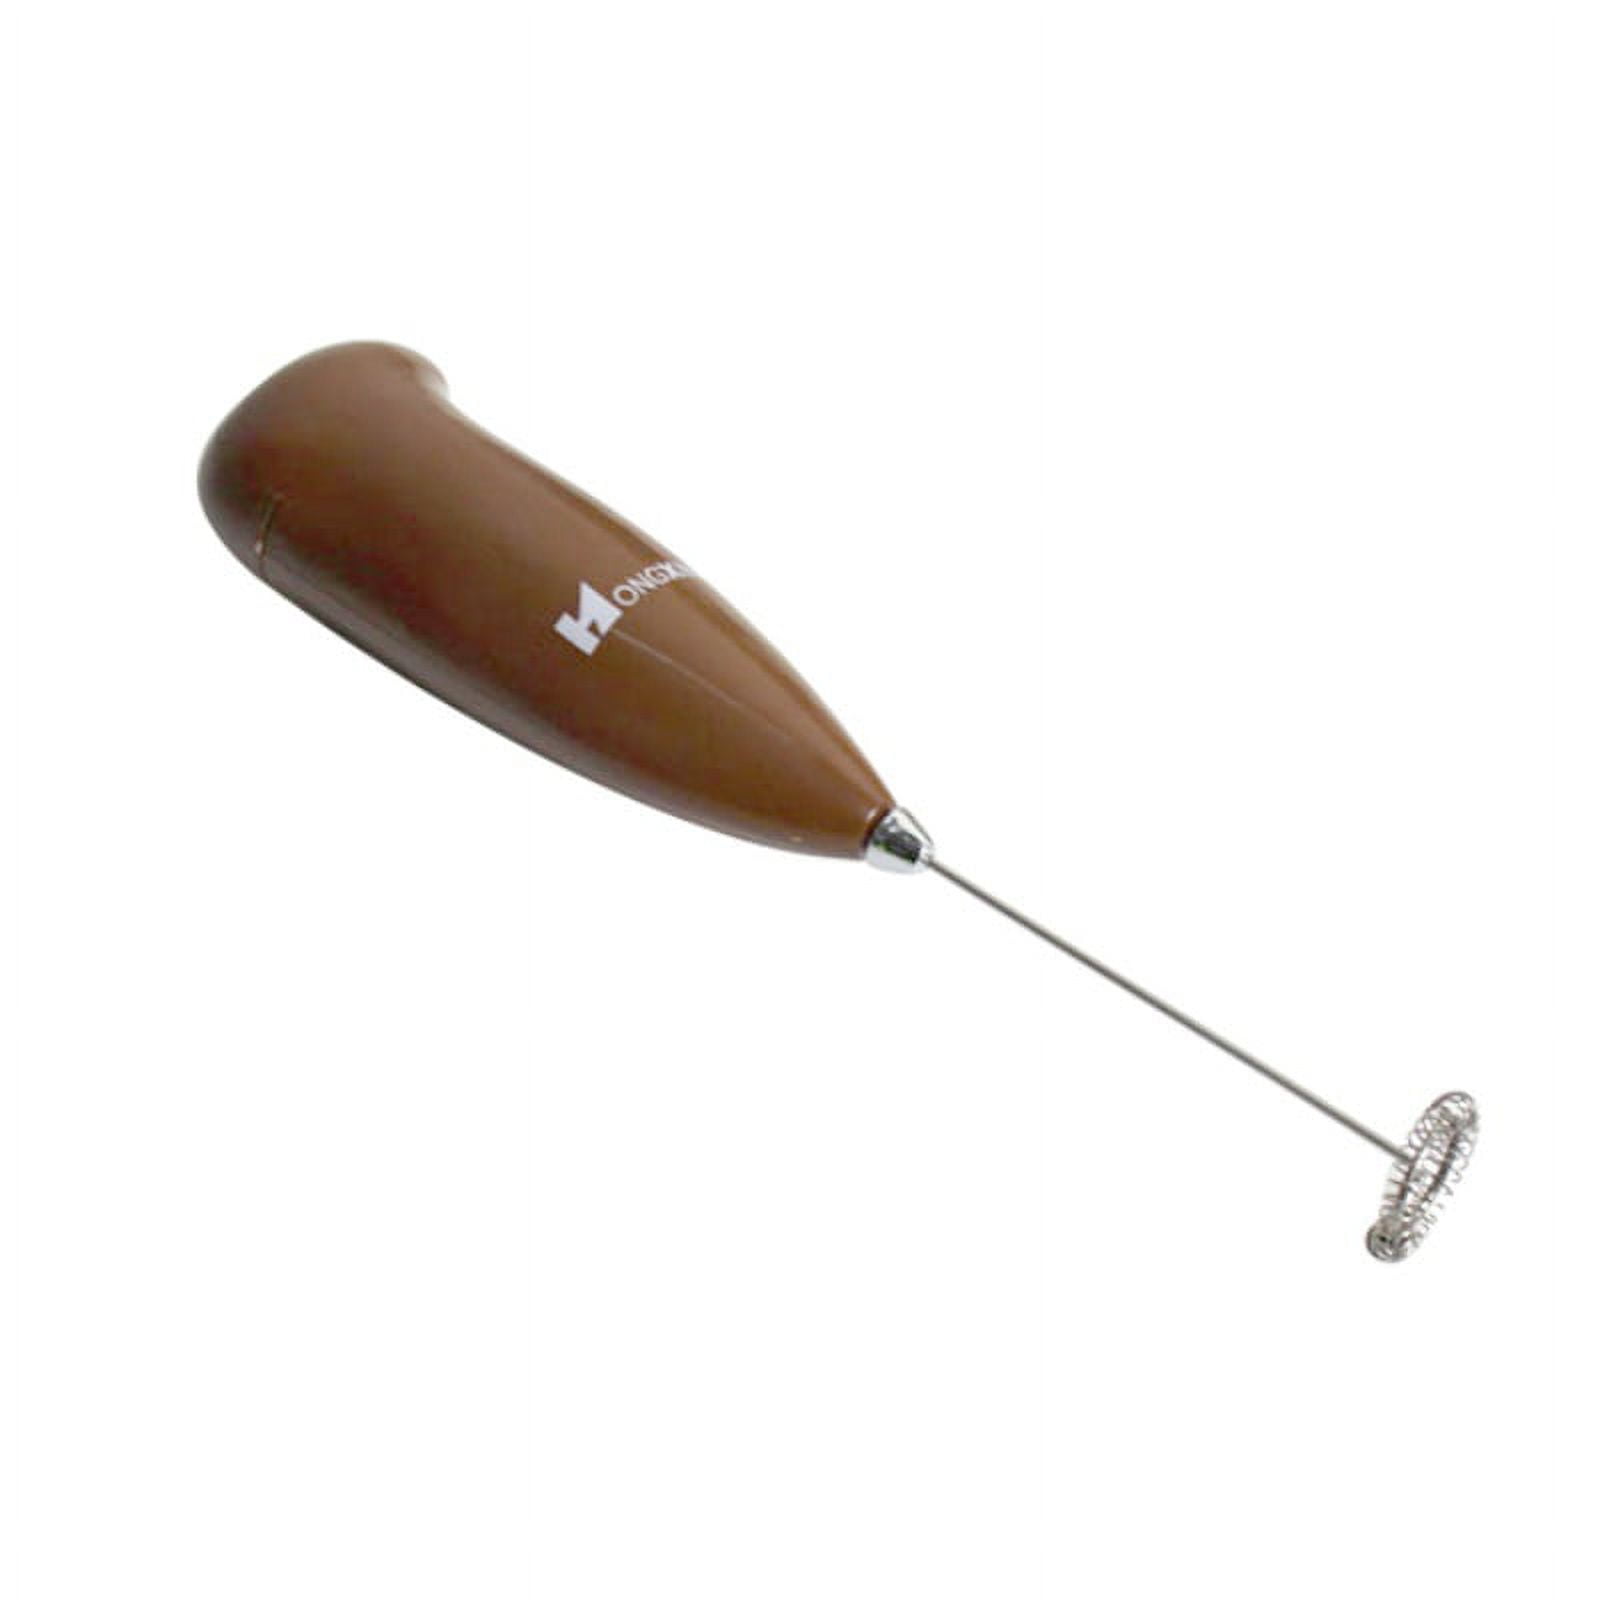 Handheld Milk Frother Wand Coffee Electric Hand Whisk for Egg